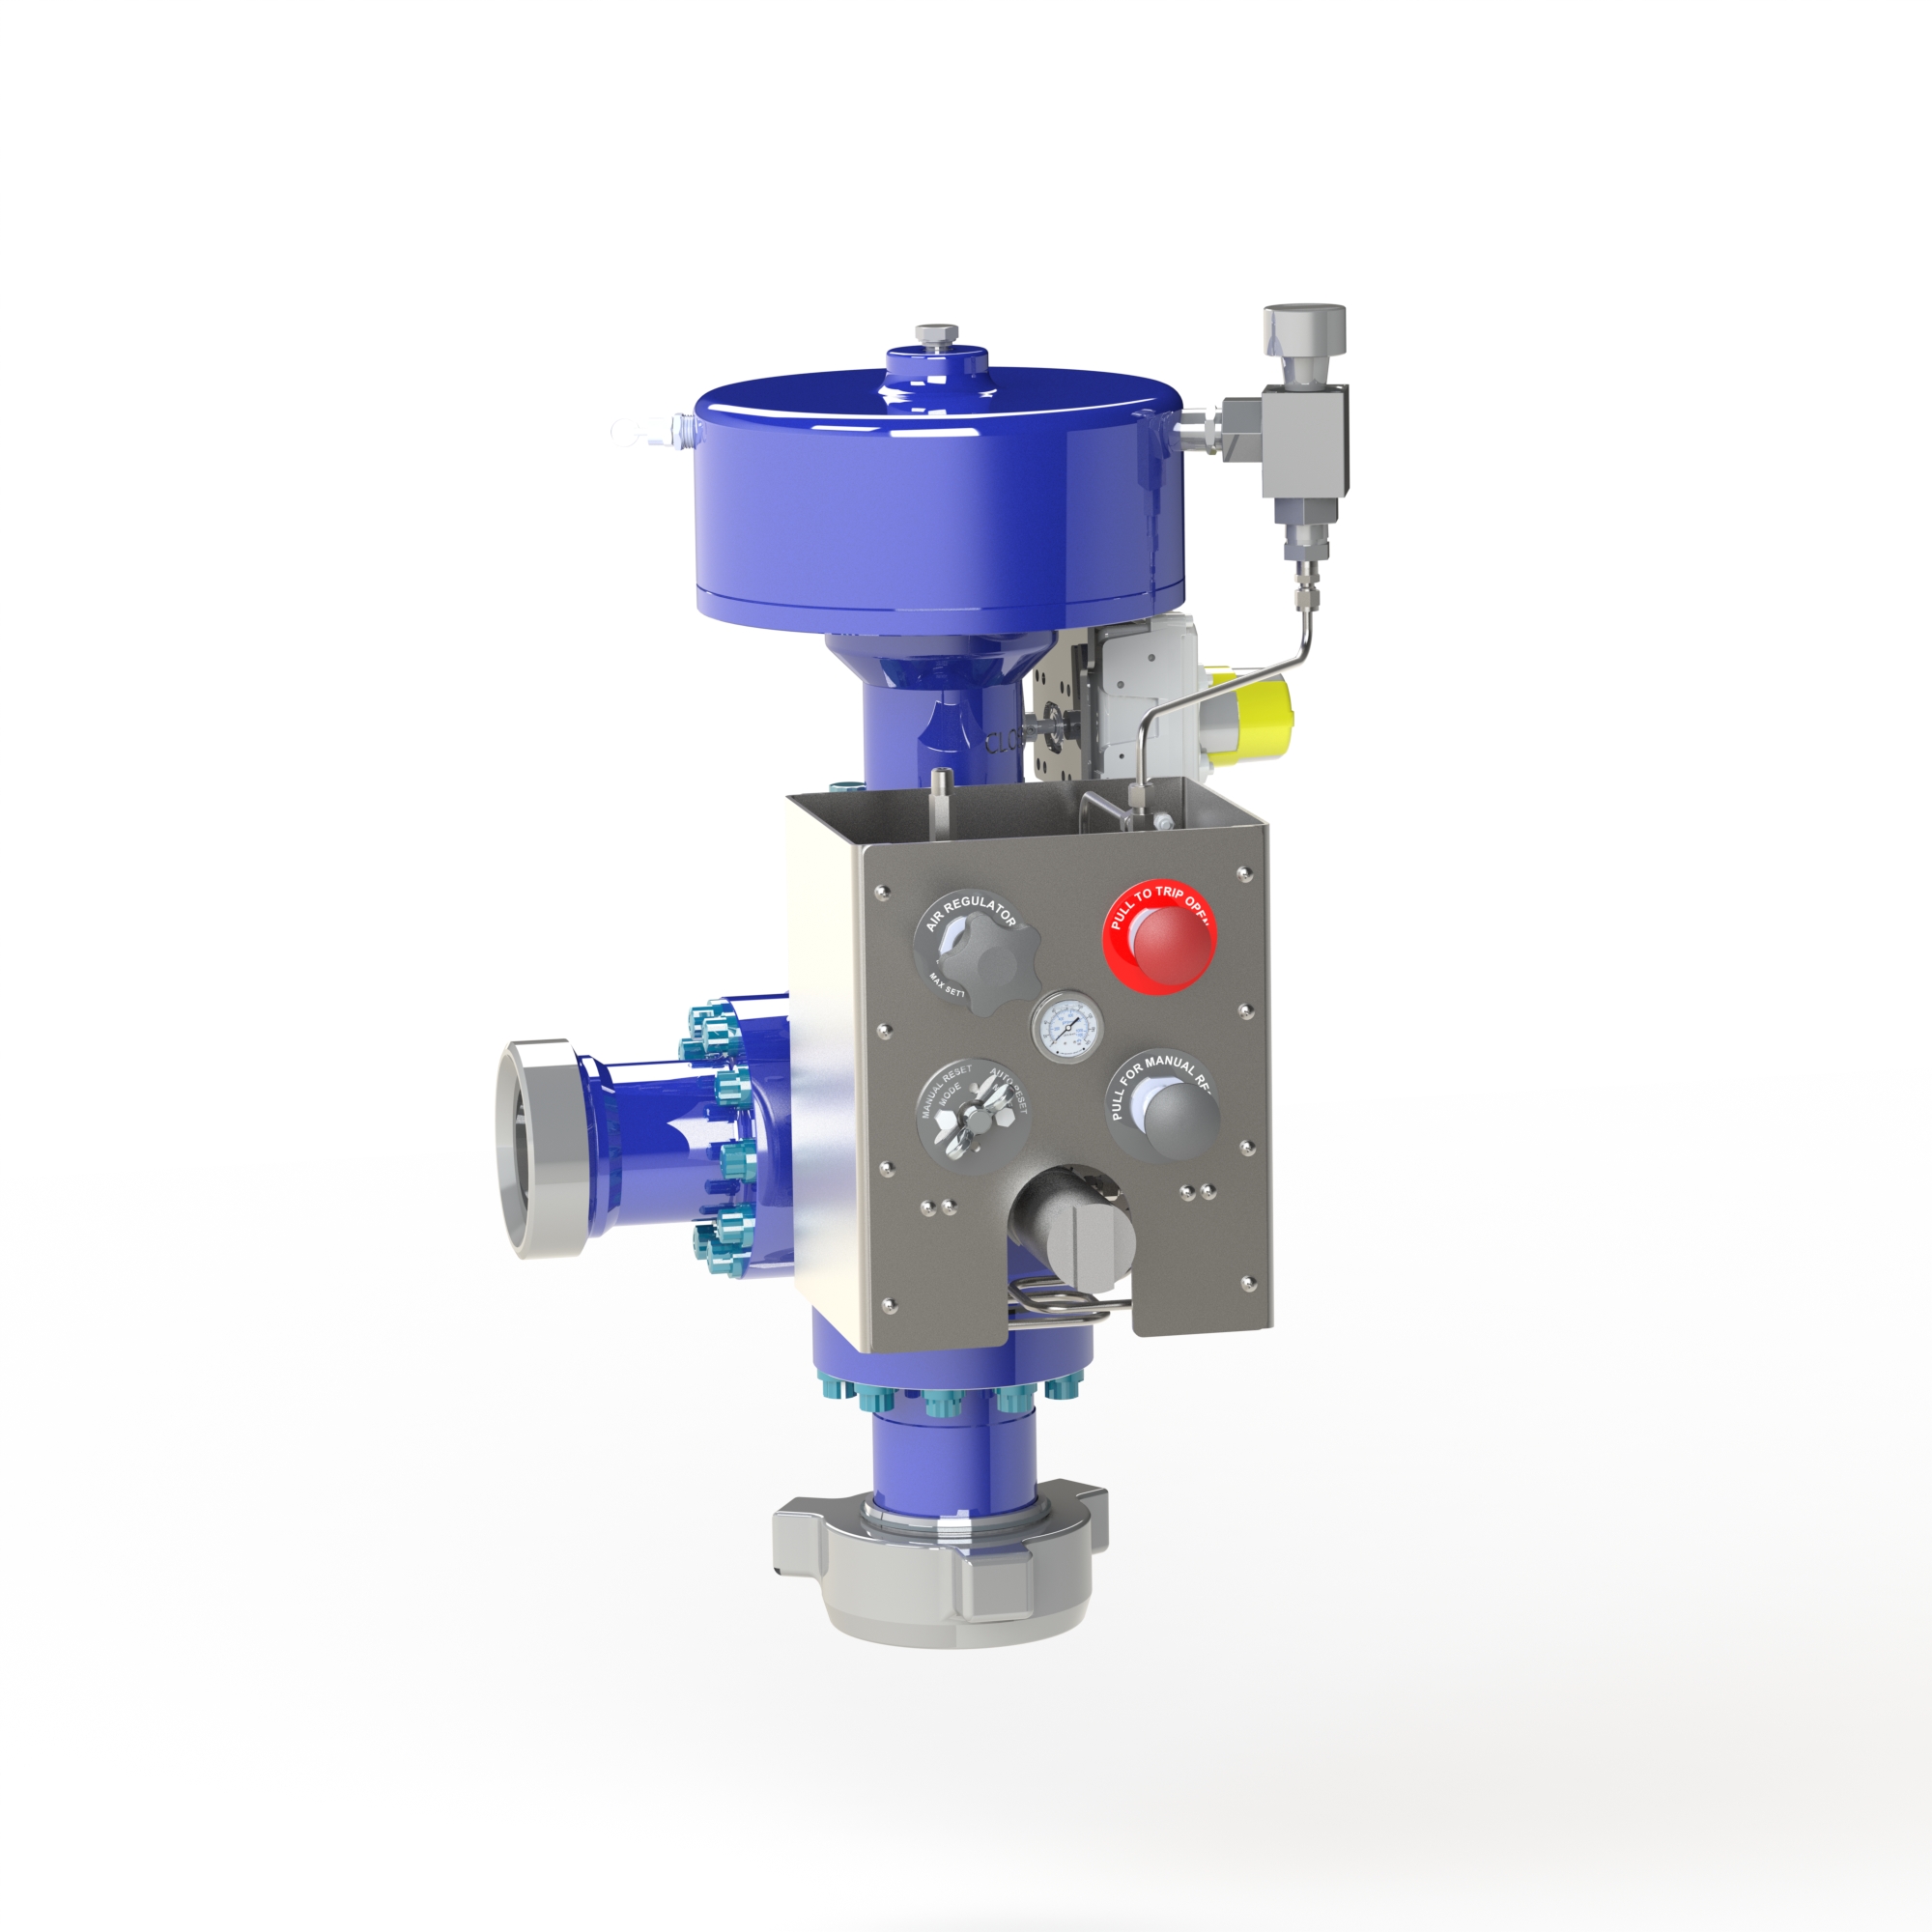 The system is designed to provide rapid pressure relief within high-pressure systems.